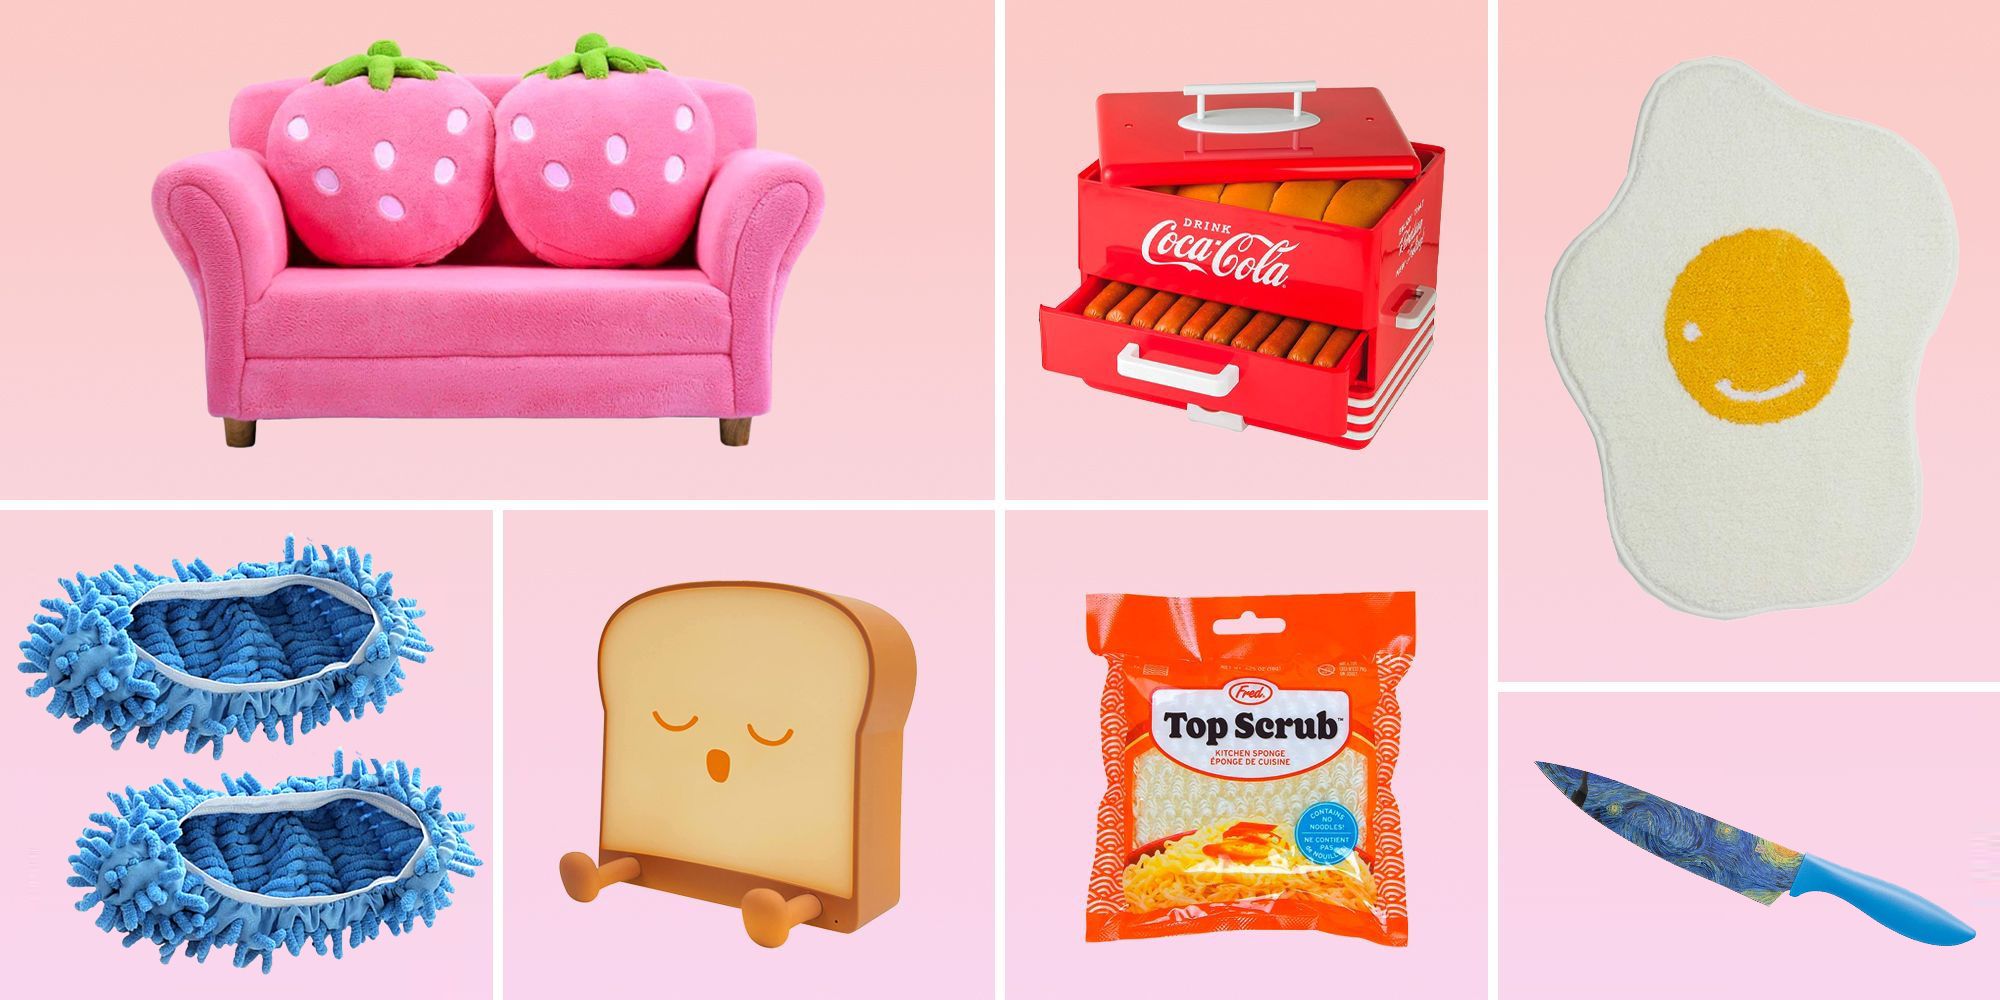 Awesome Products That Cost $1 - Dollar Items to Buy in 2019